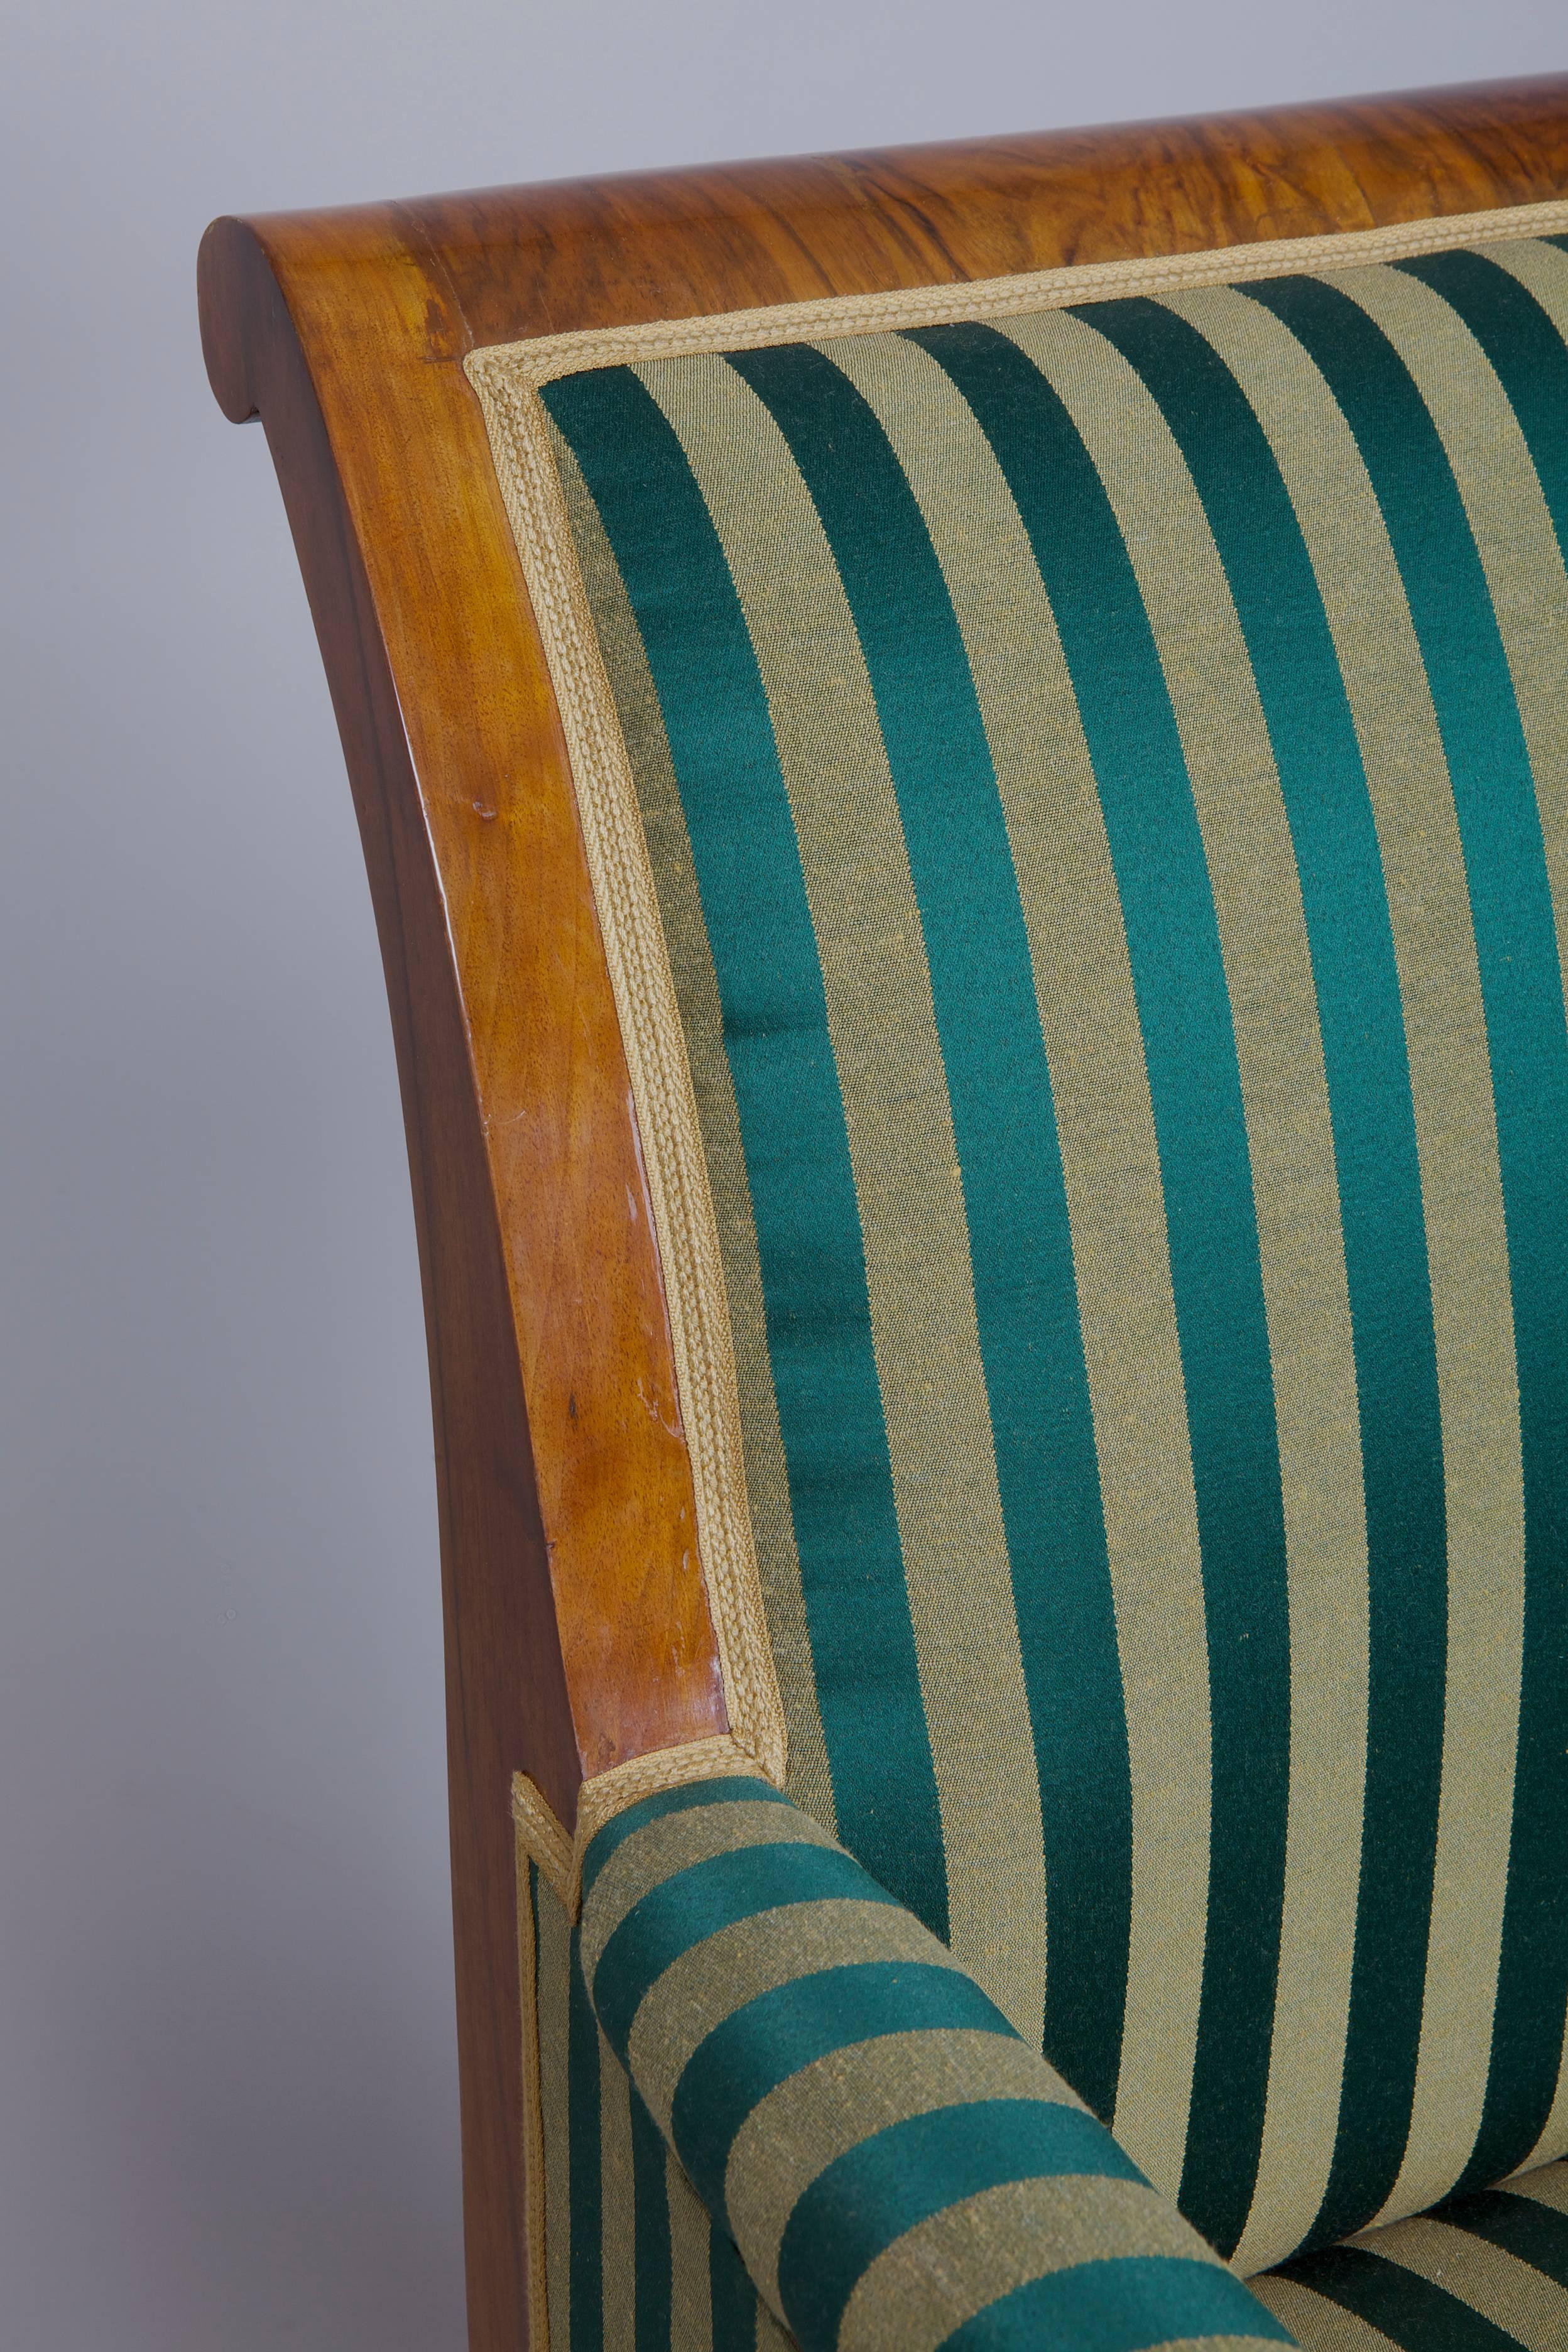 Unknown 19th Century Restored Pair of Biedermeier Walnut Armchairs, Green and gold color